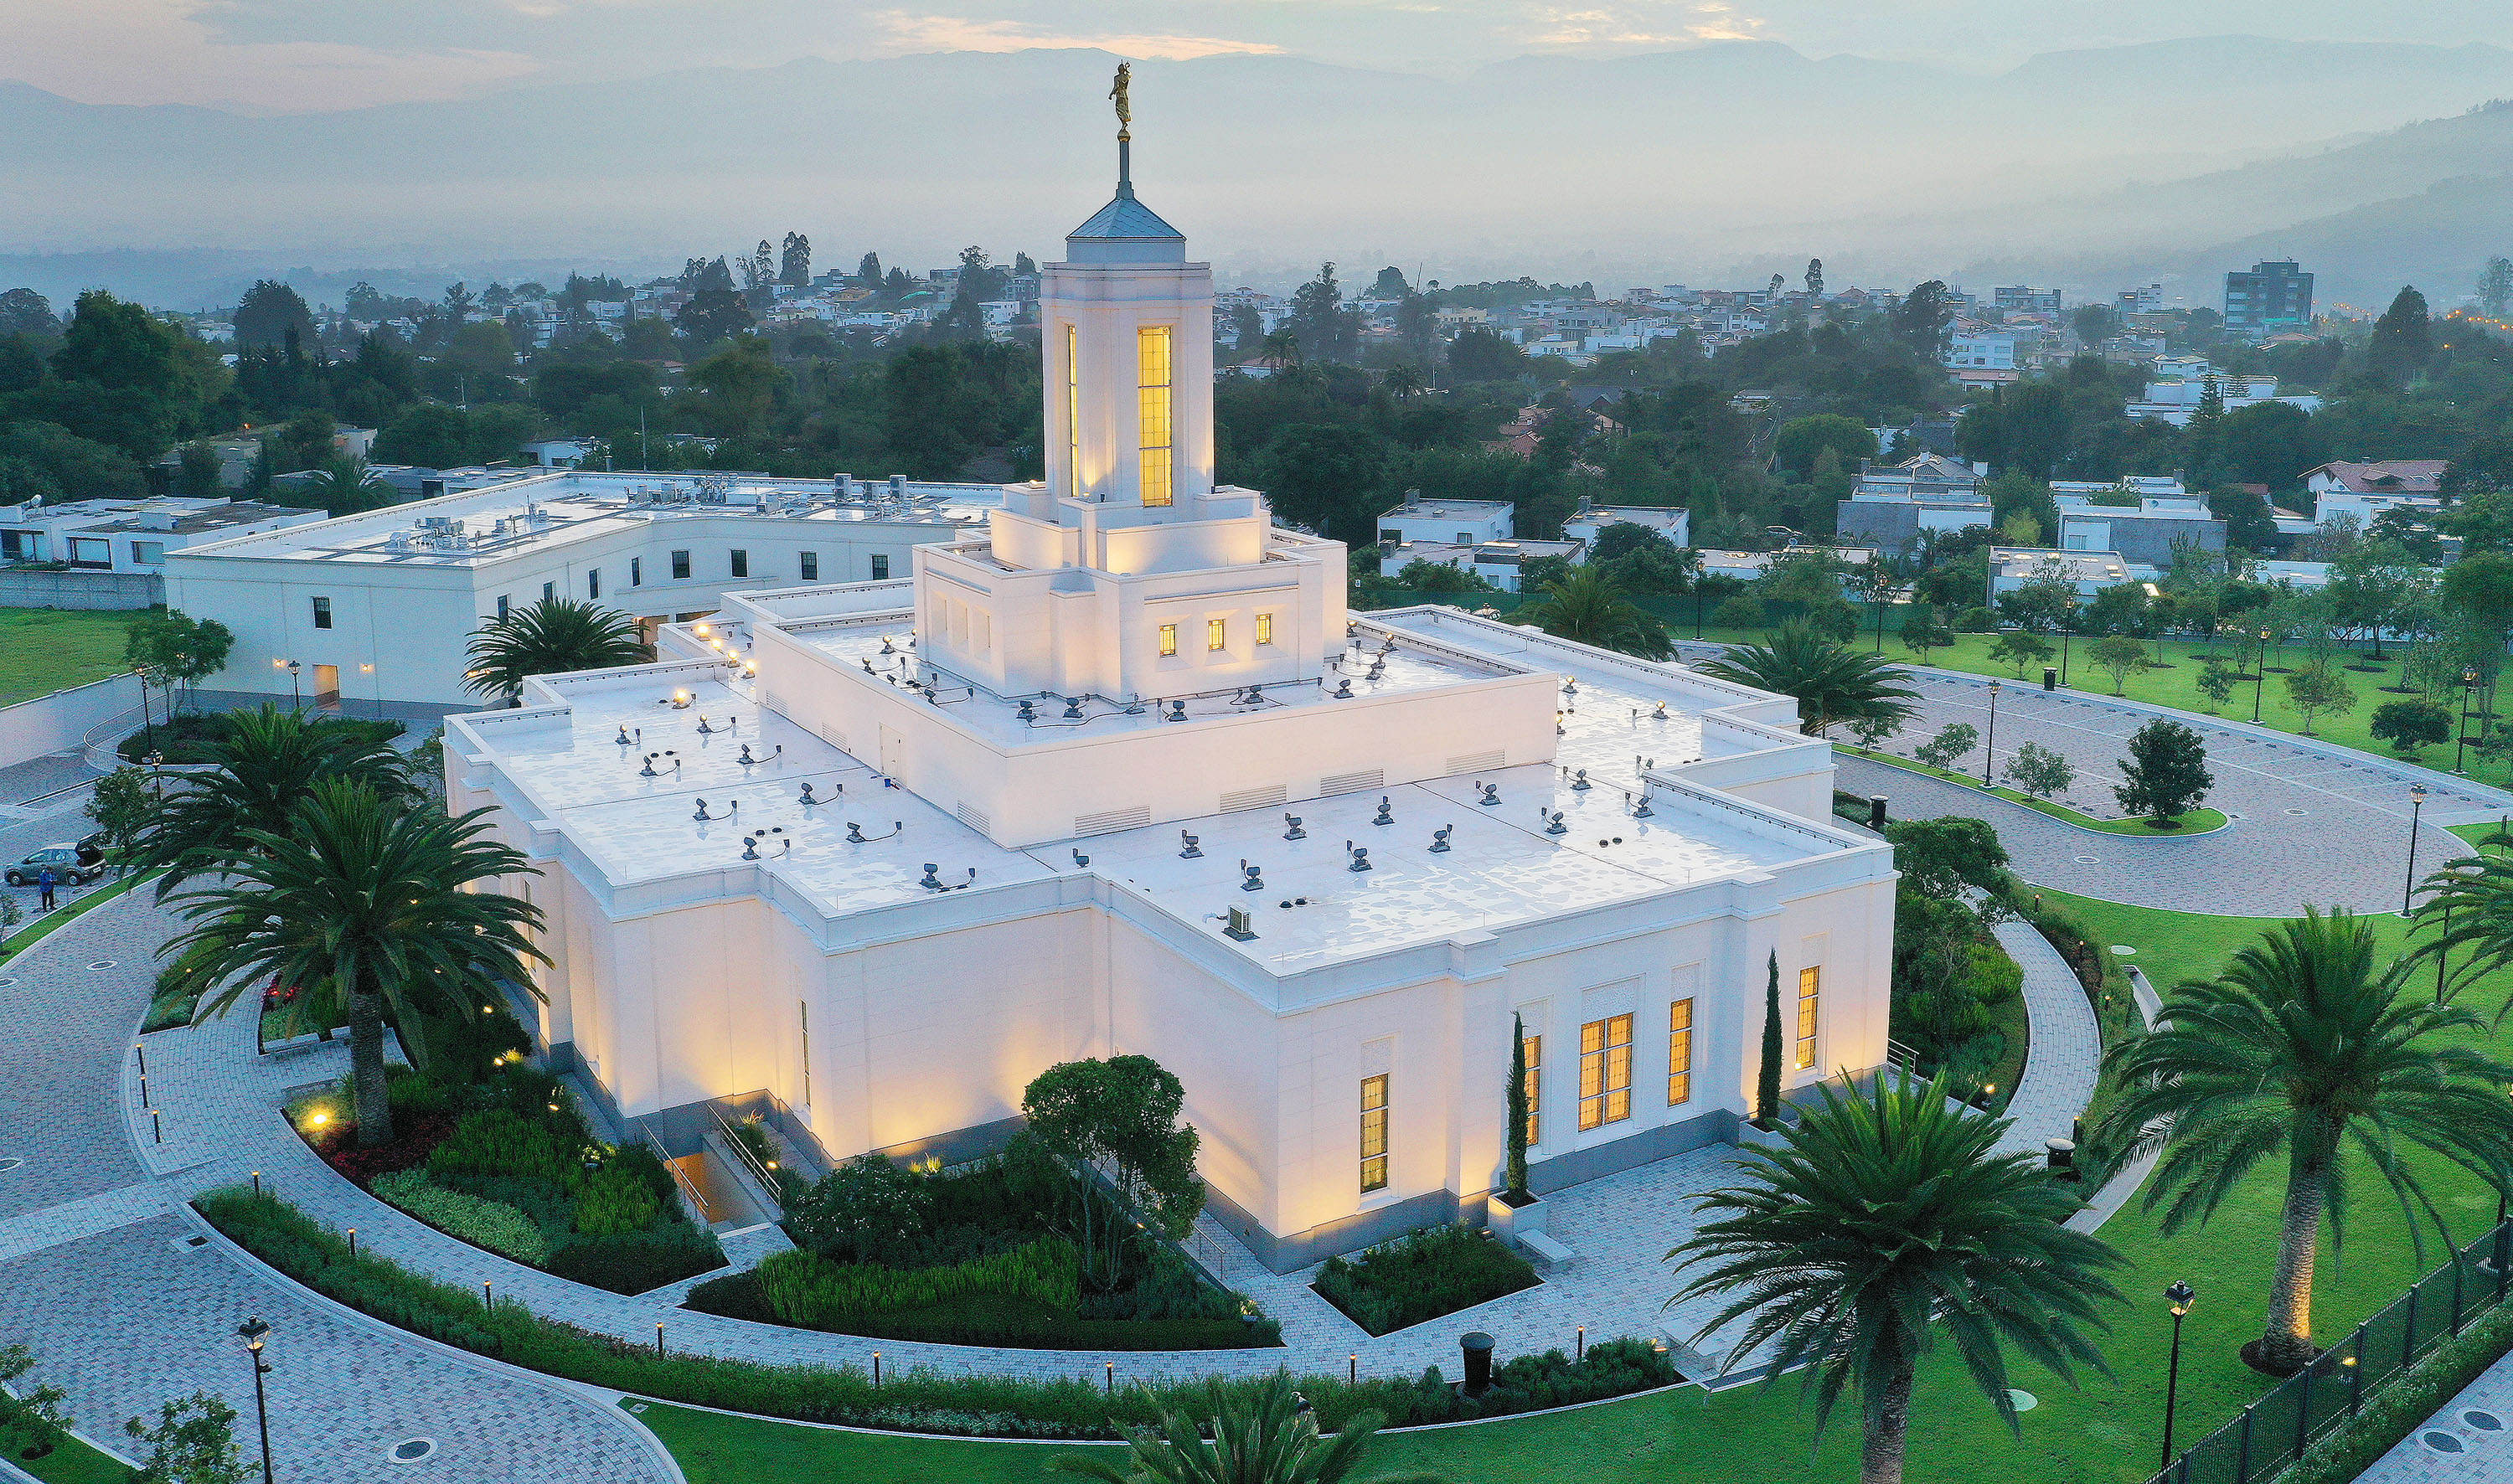 The Quito Ecuador Temple from an aerial view.